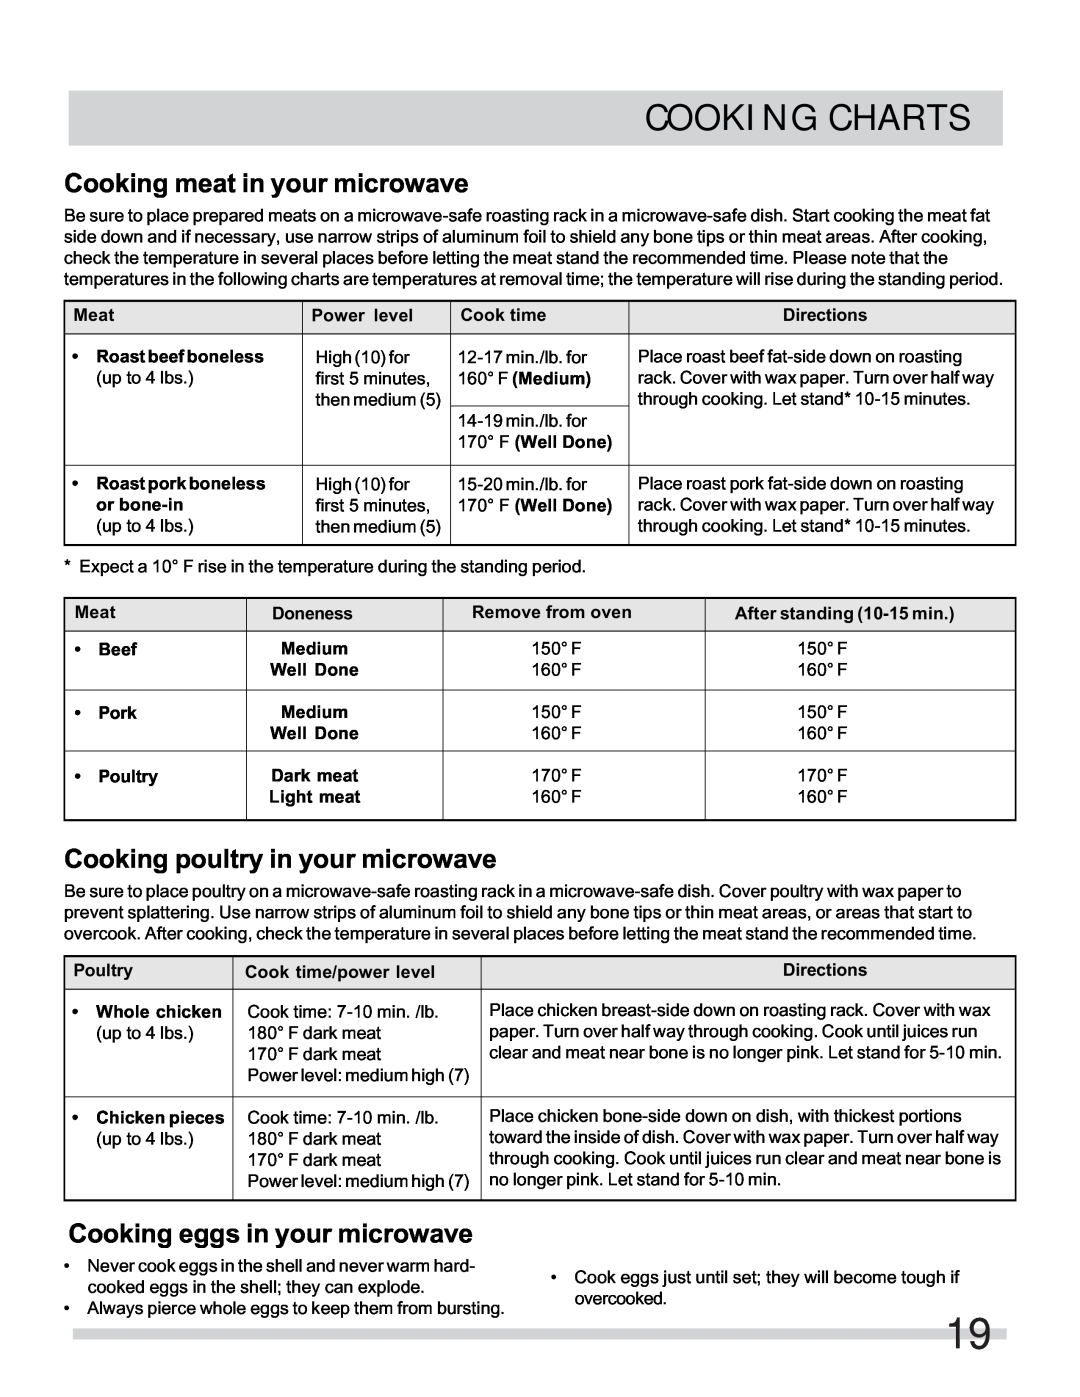 Frigidaire FFMV162LQ, FFMV162LW Cooking Charts, Cooking meat in your microwave, Cooking poultry in your microwave 